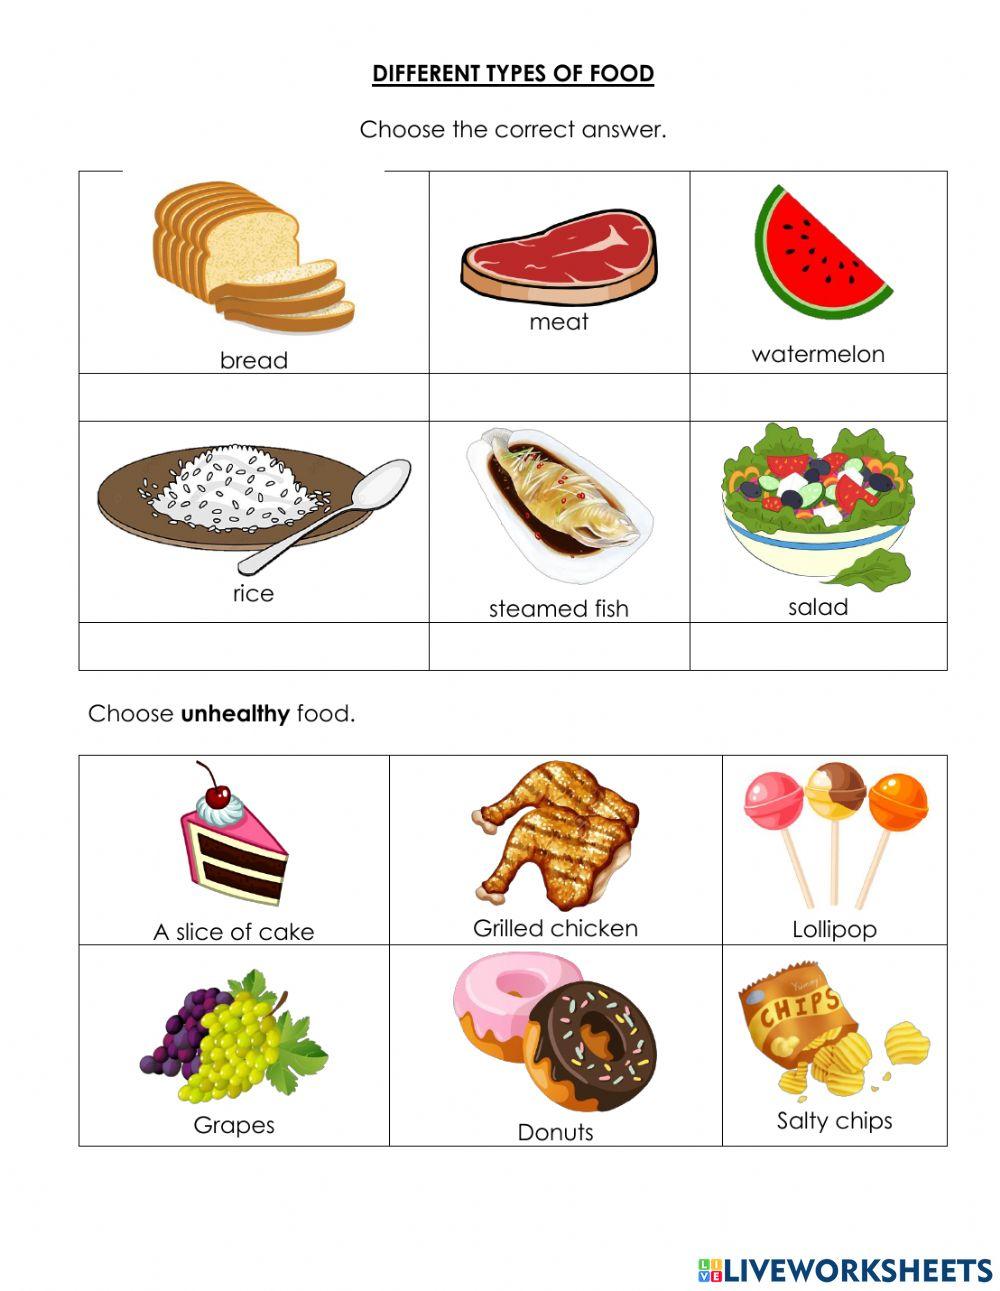 Different Types of Food